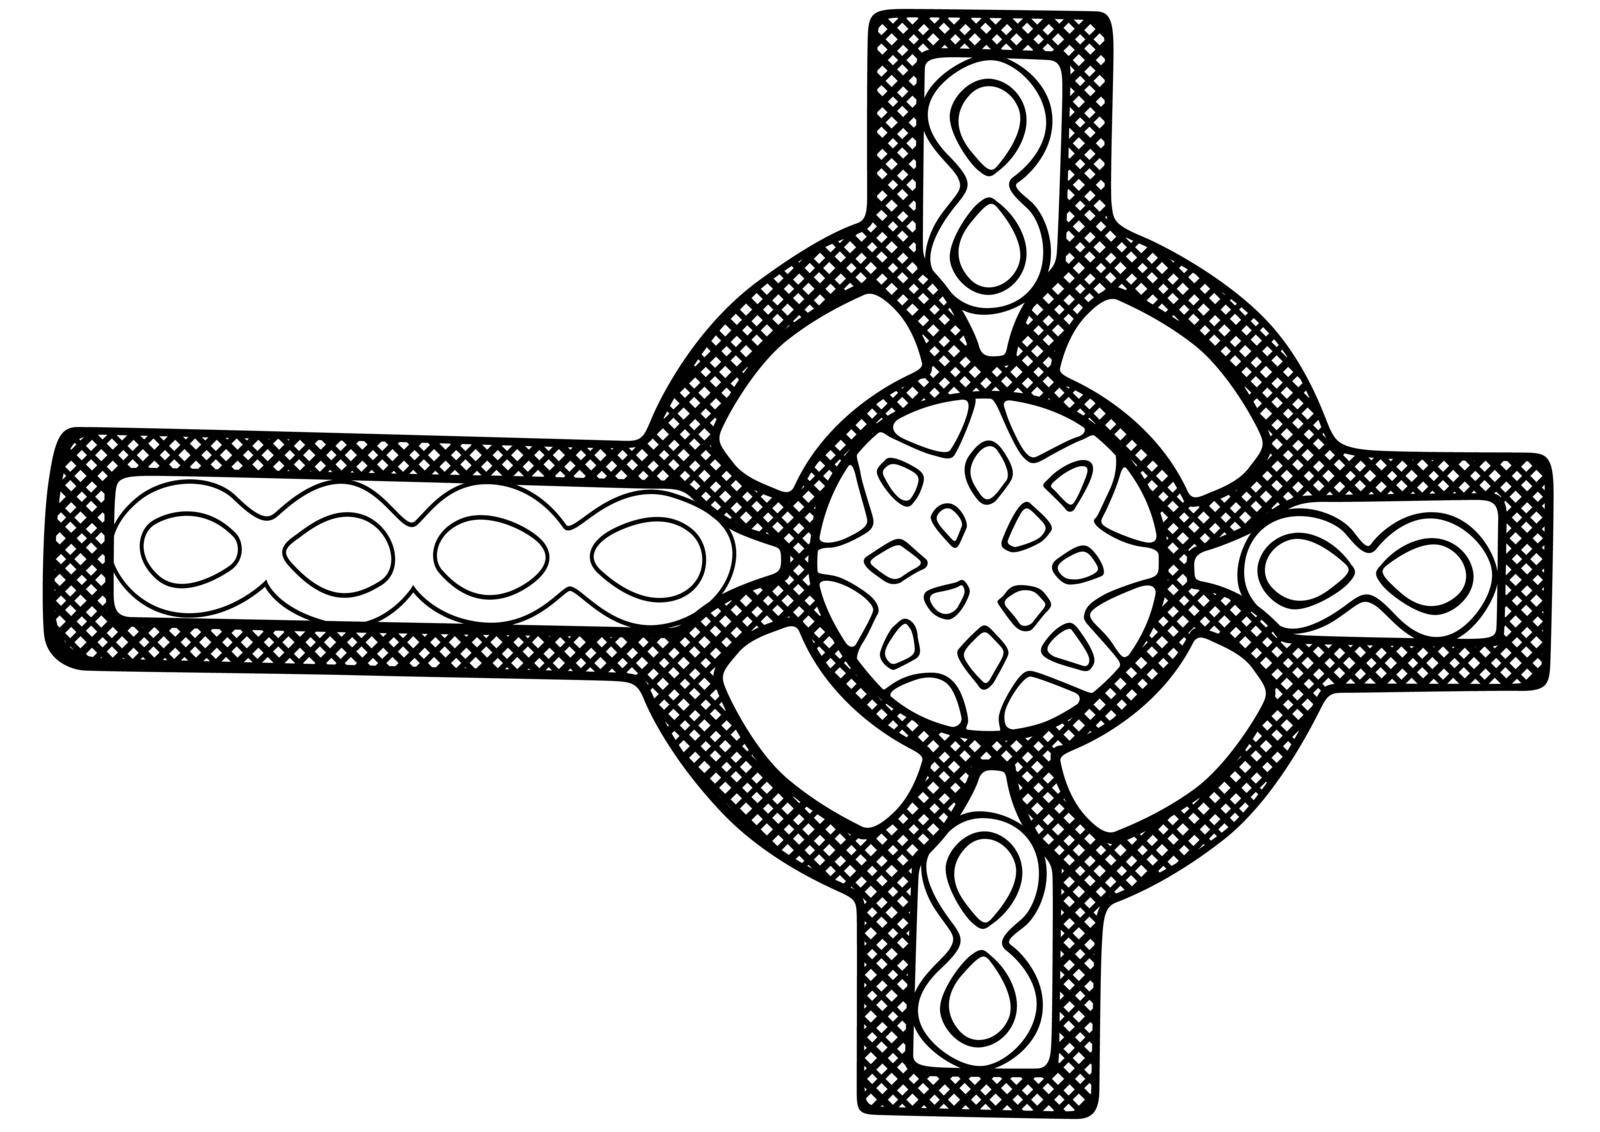 Black and White Celtic Cross - Ornamental Cross Isolated on White Background, Vector Graphic